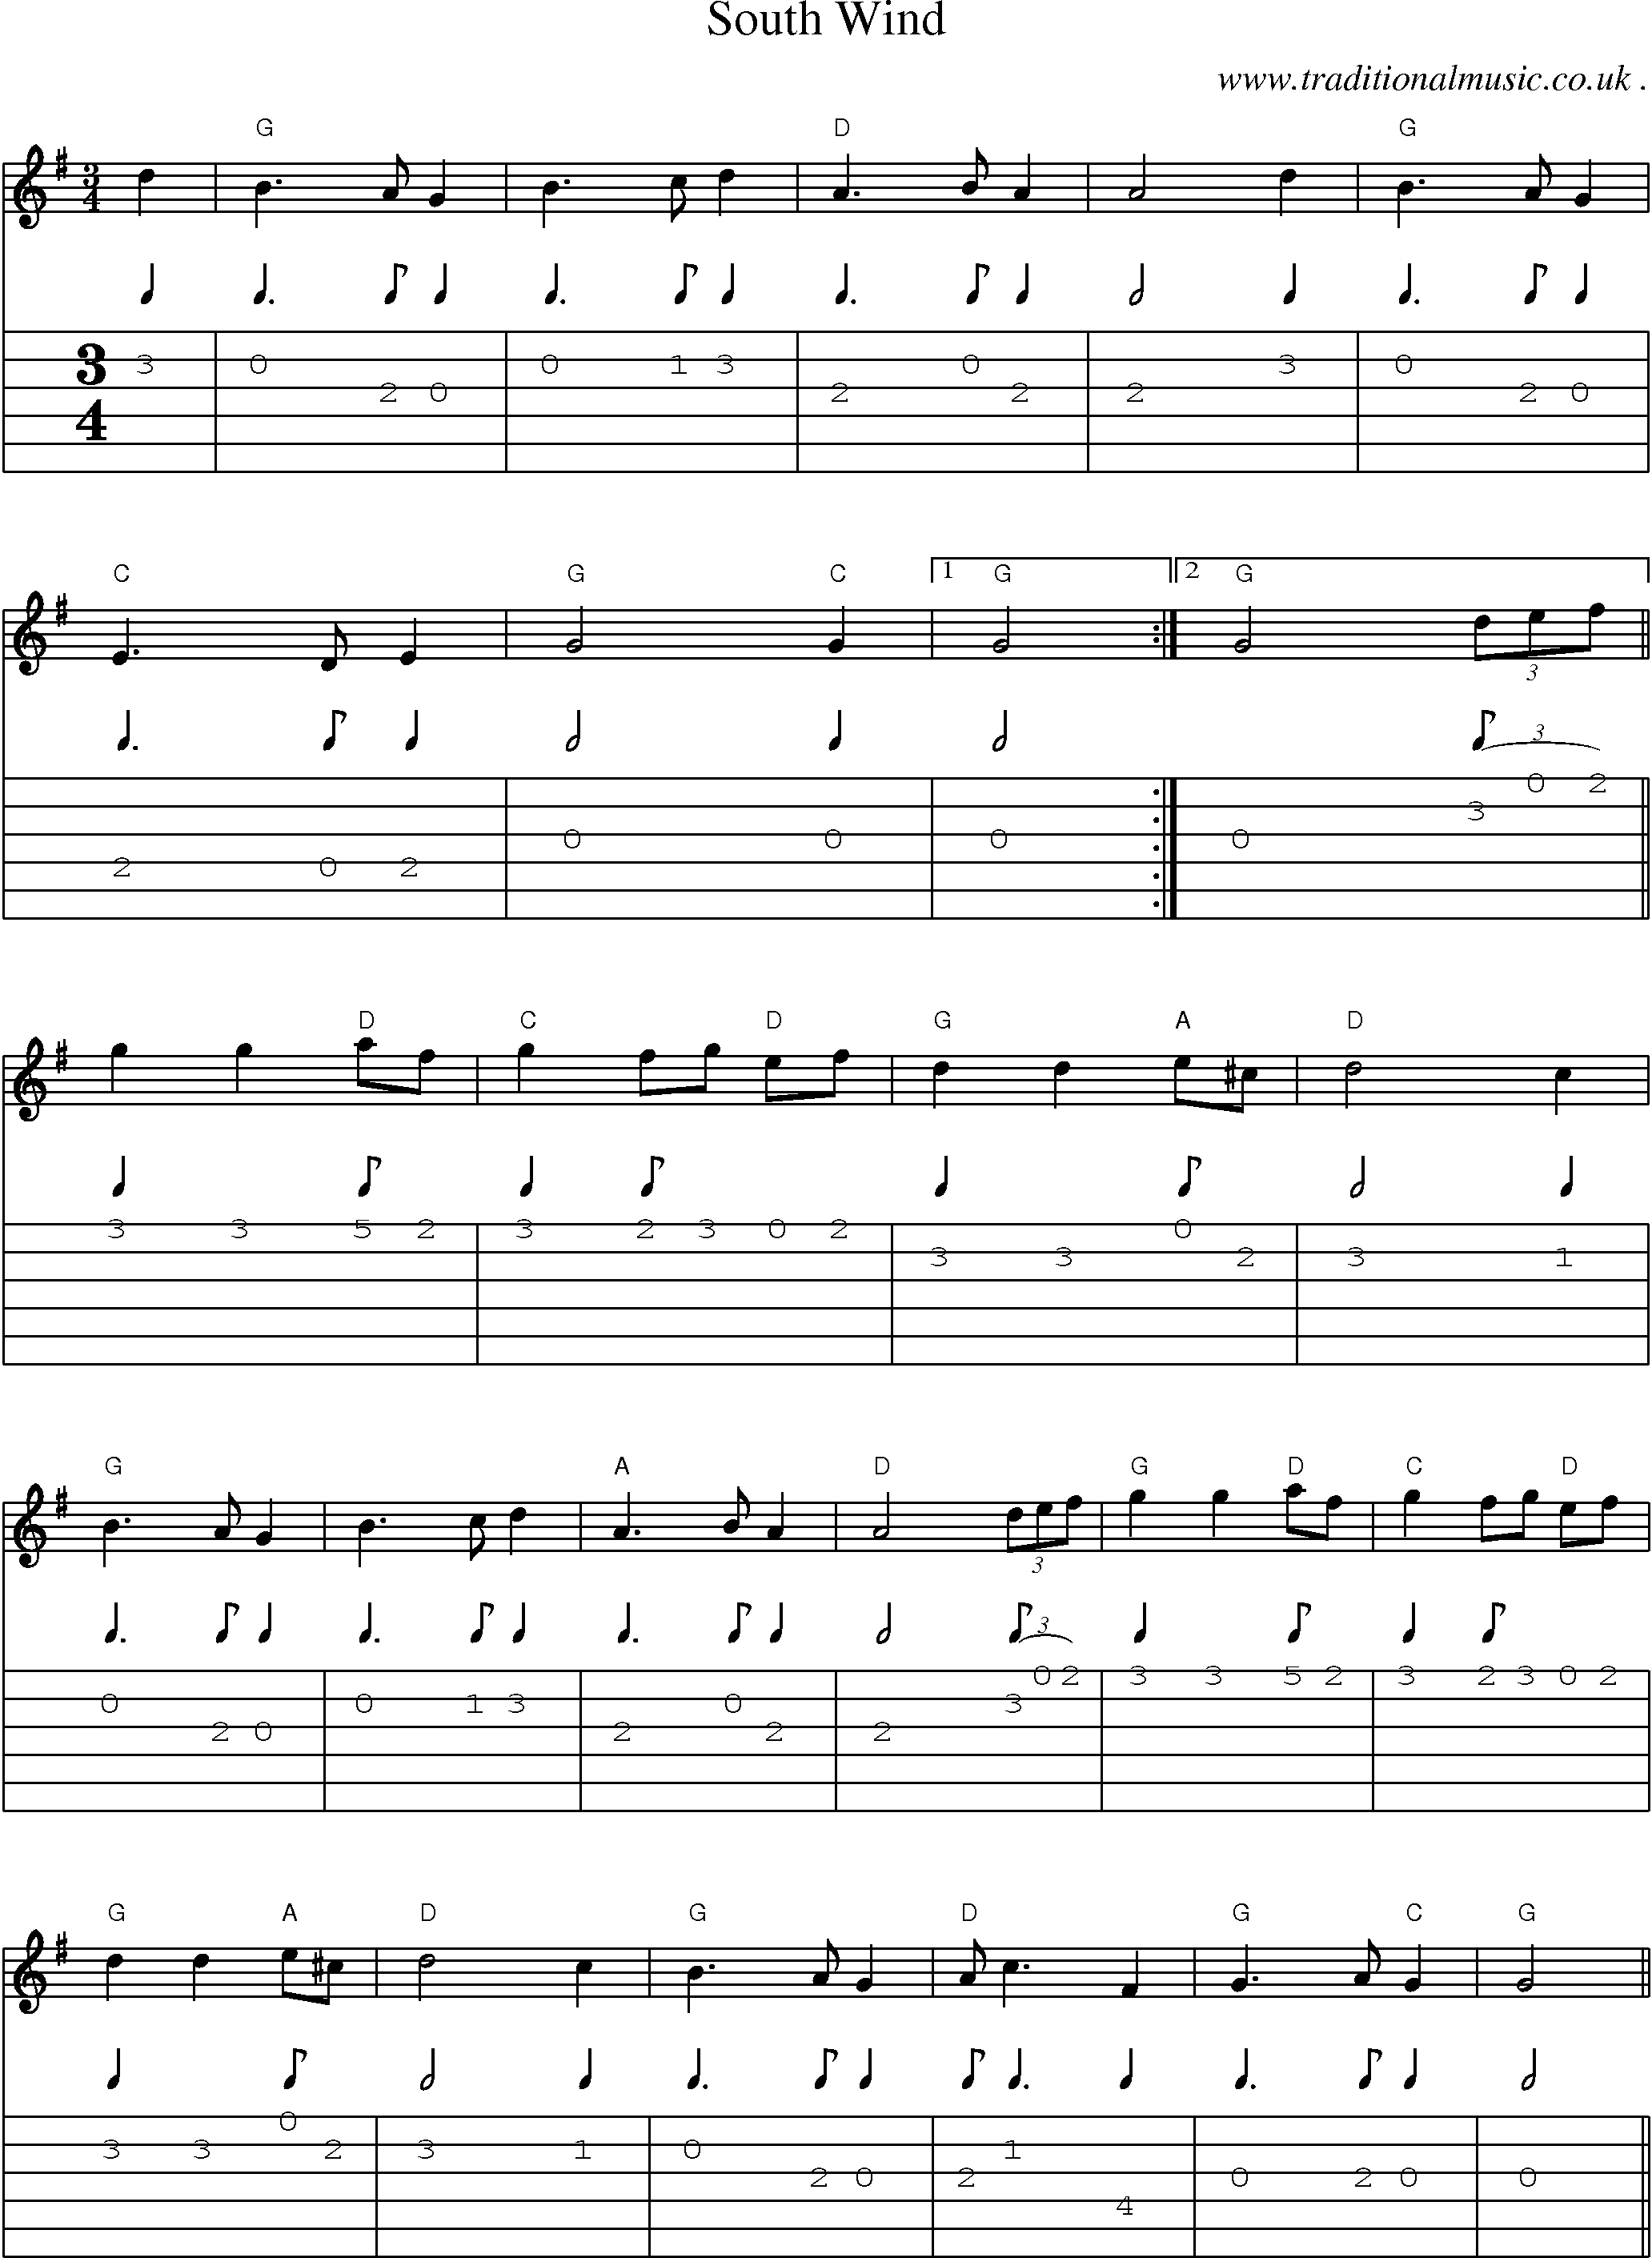 Music Score and Guitar Tabs for South Wind